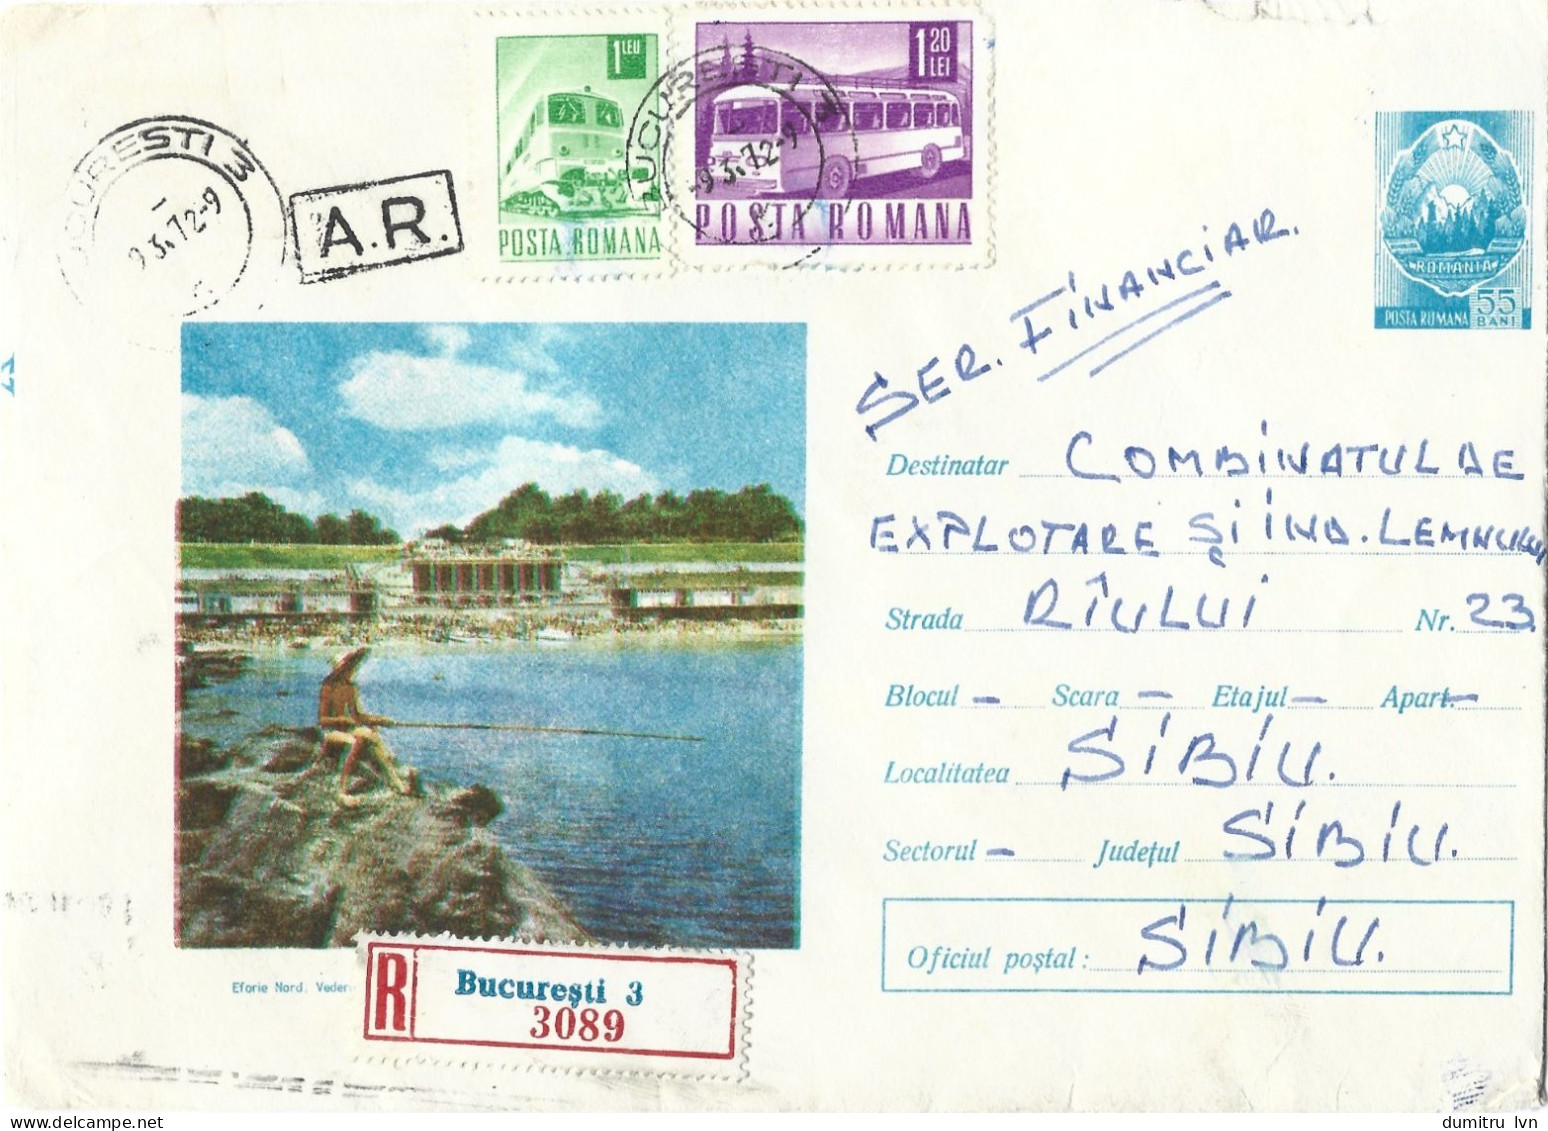 ROMANIA 1972 EFORIE NORD VIEW, PEOPLE FISHING, SEASIDE, BUILDING, BEACH, CIRCULATED ENVELOPE, COVER STATIONERY - Ganzsachen